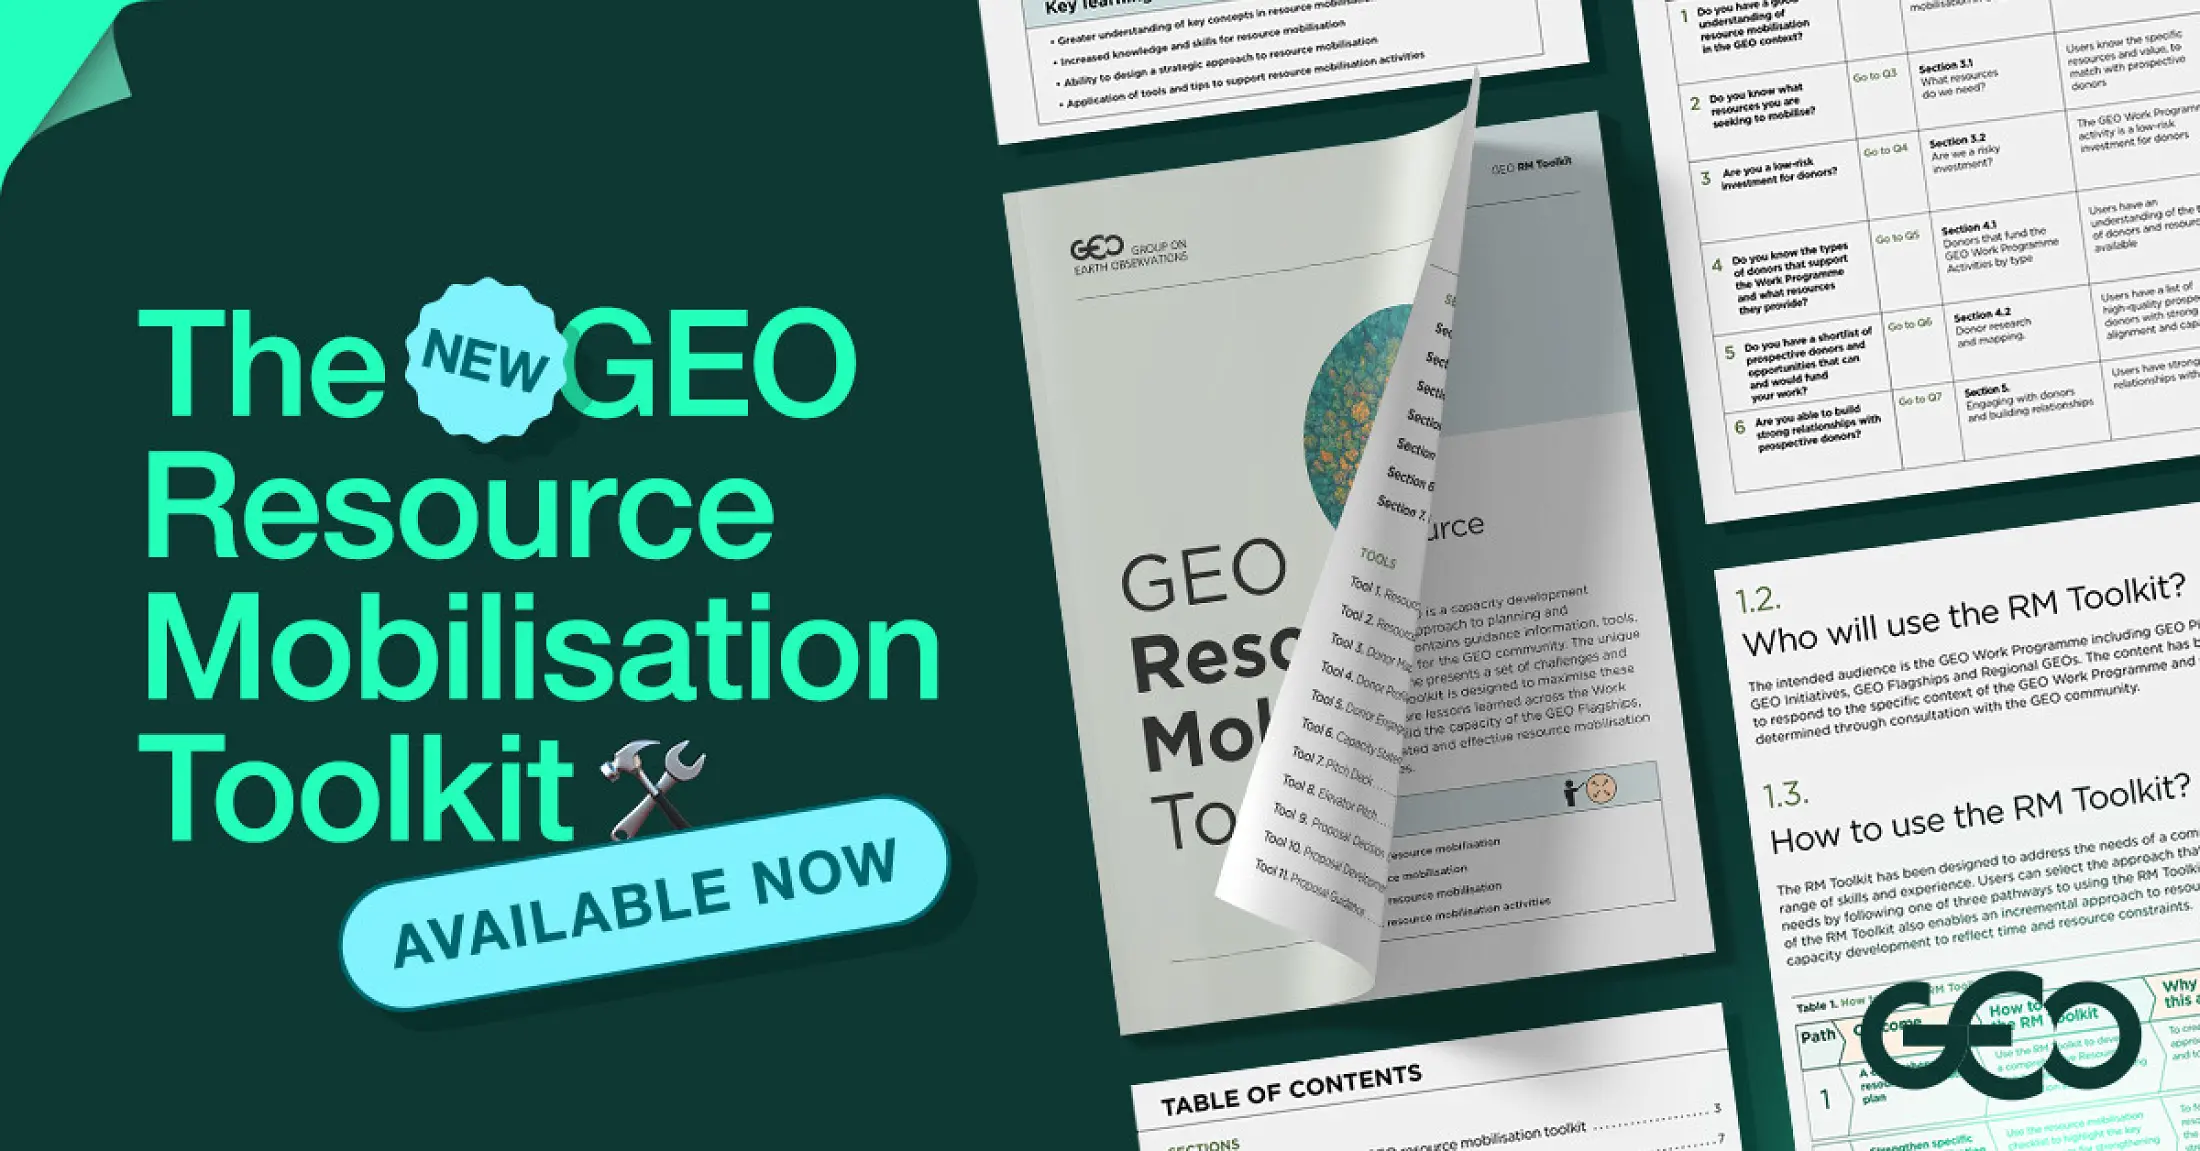 Unveiling the first GEO resource mobilization toolkit